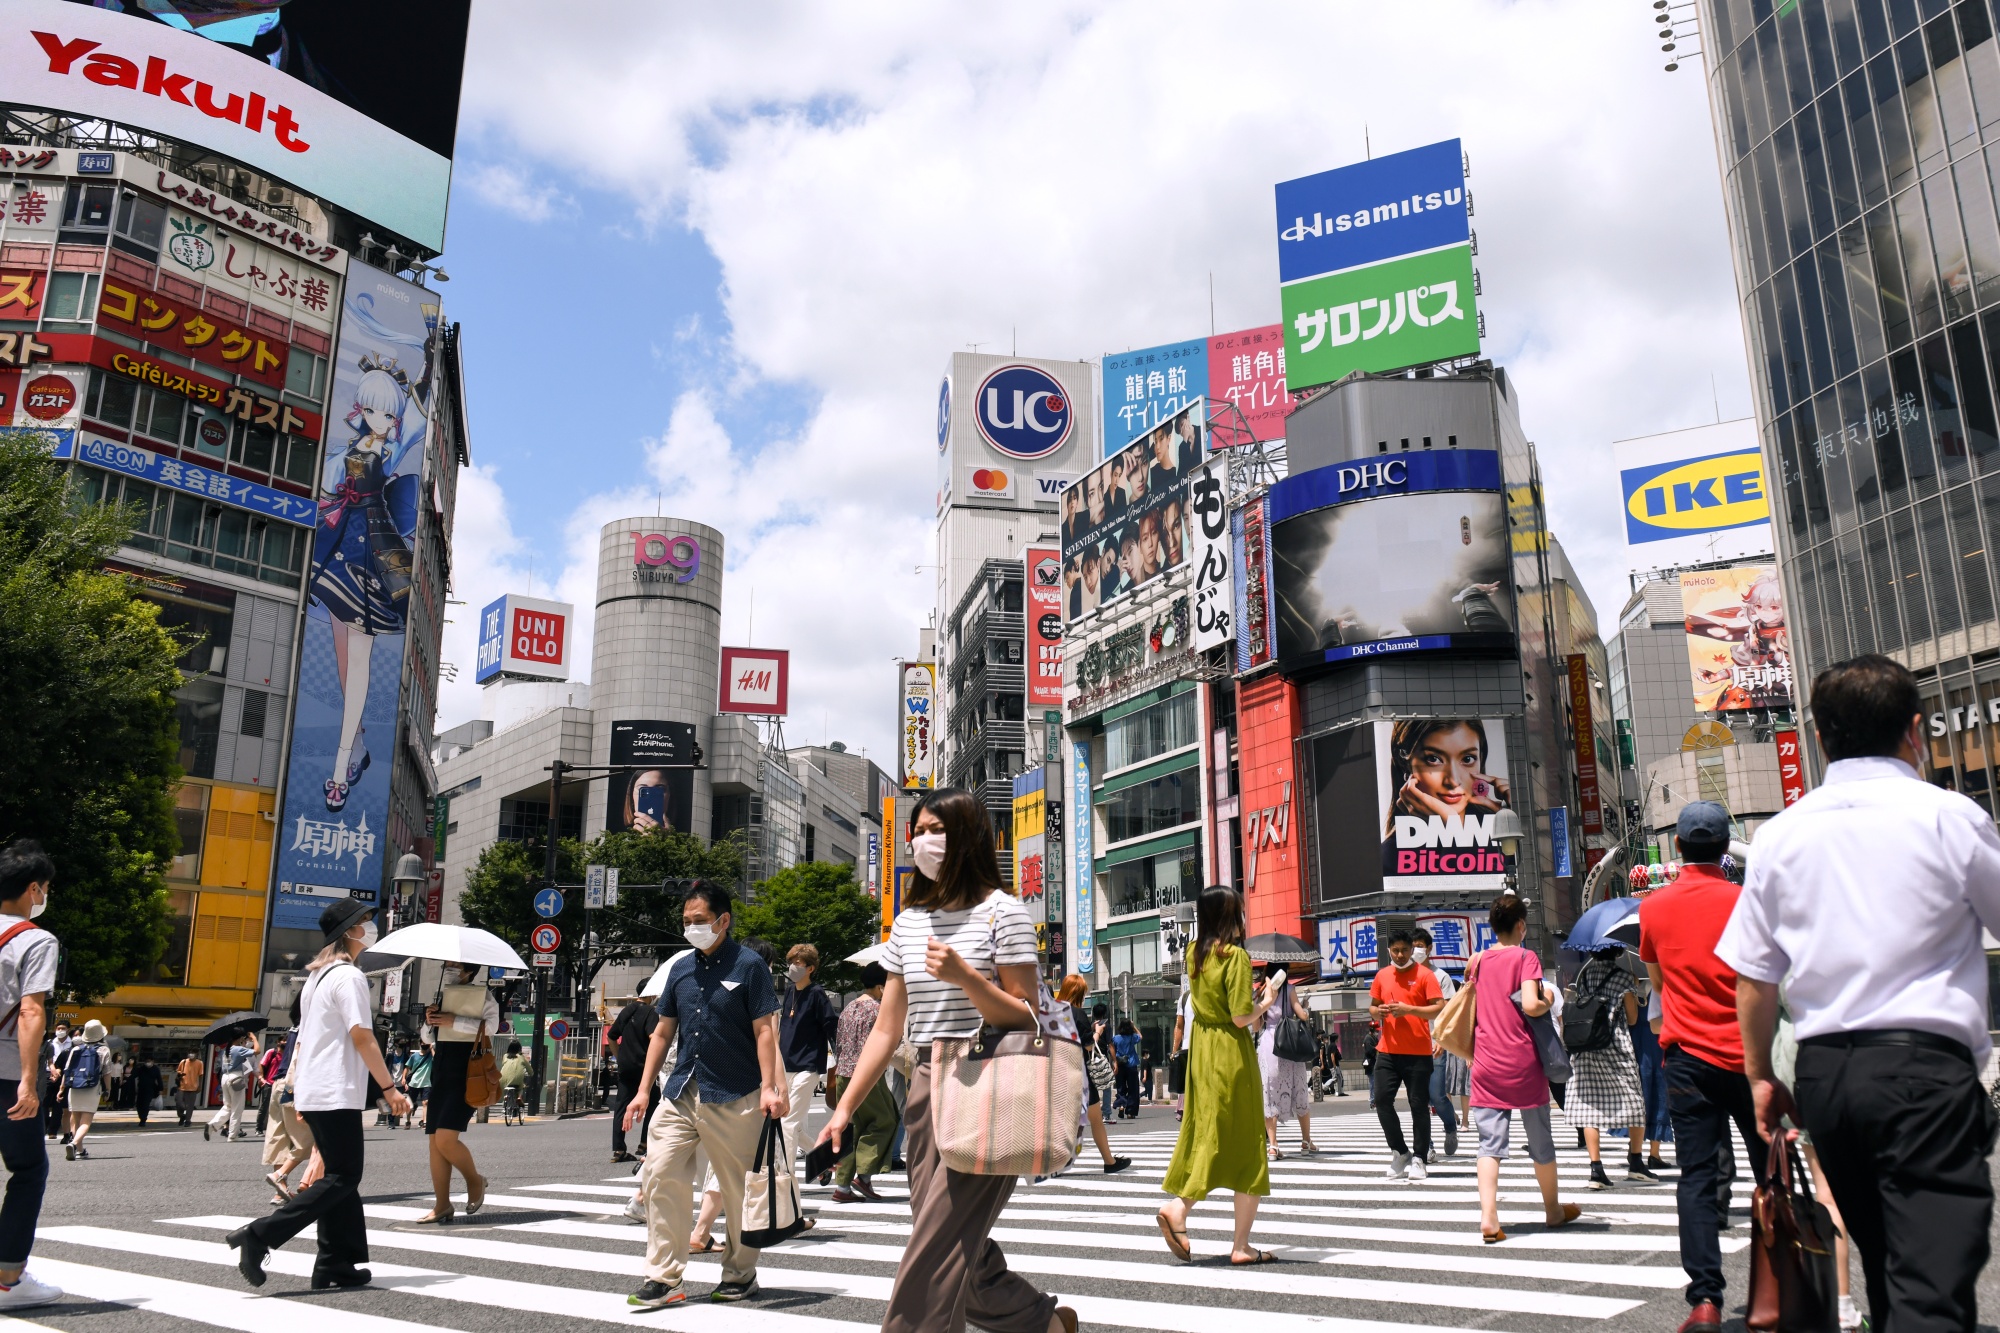 Tokyo's Population Declines for First Time in 26 Years With Remote-Work  Trend - Bloomberg